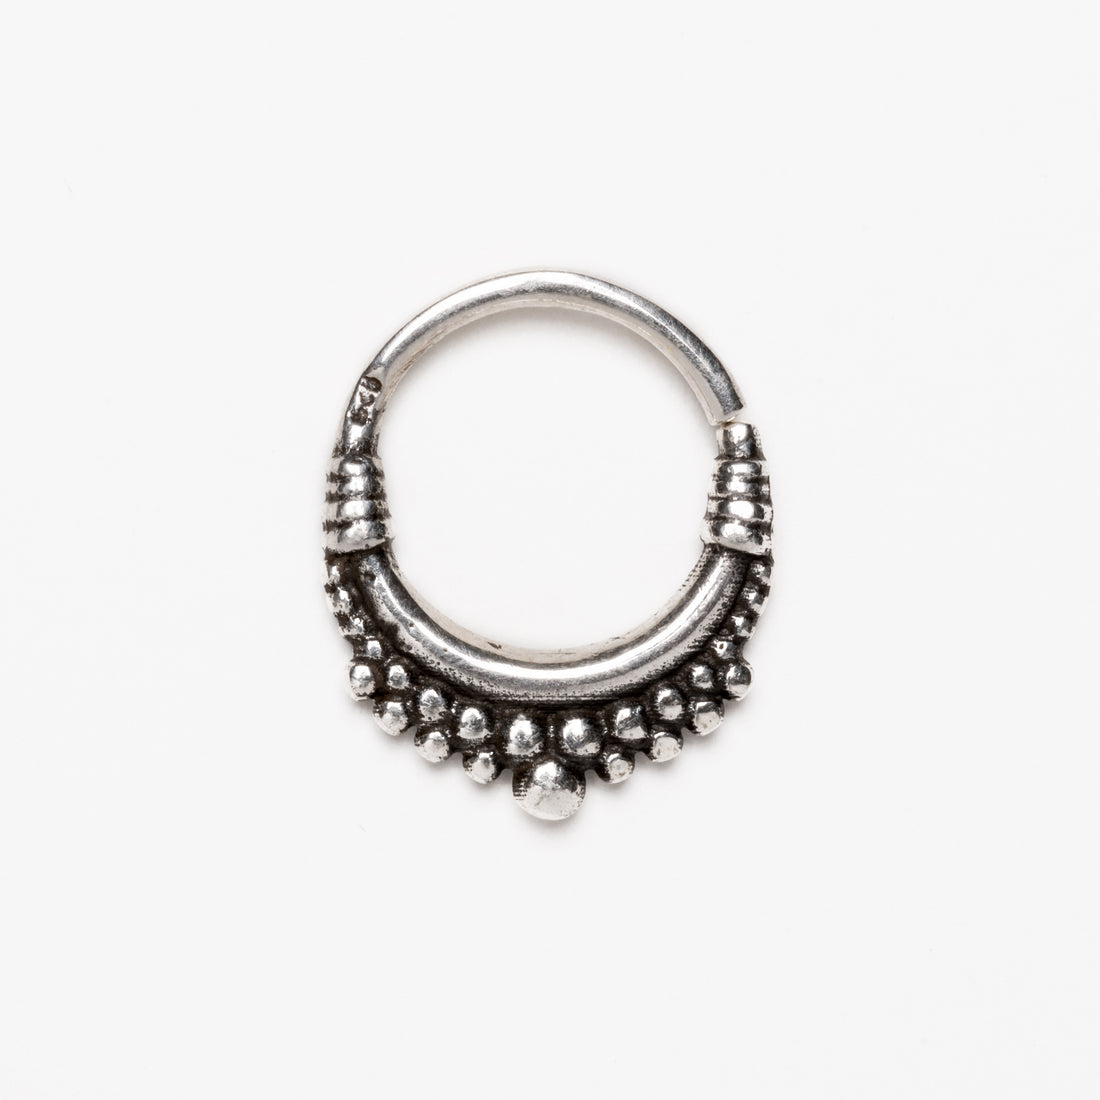 Lola Silver Septum Ring frontal view